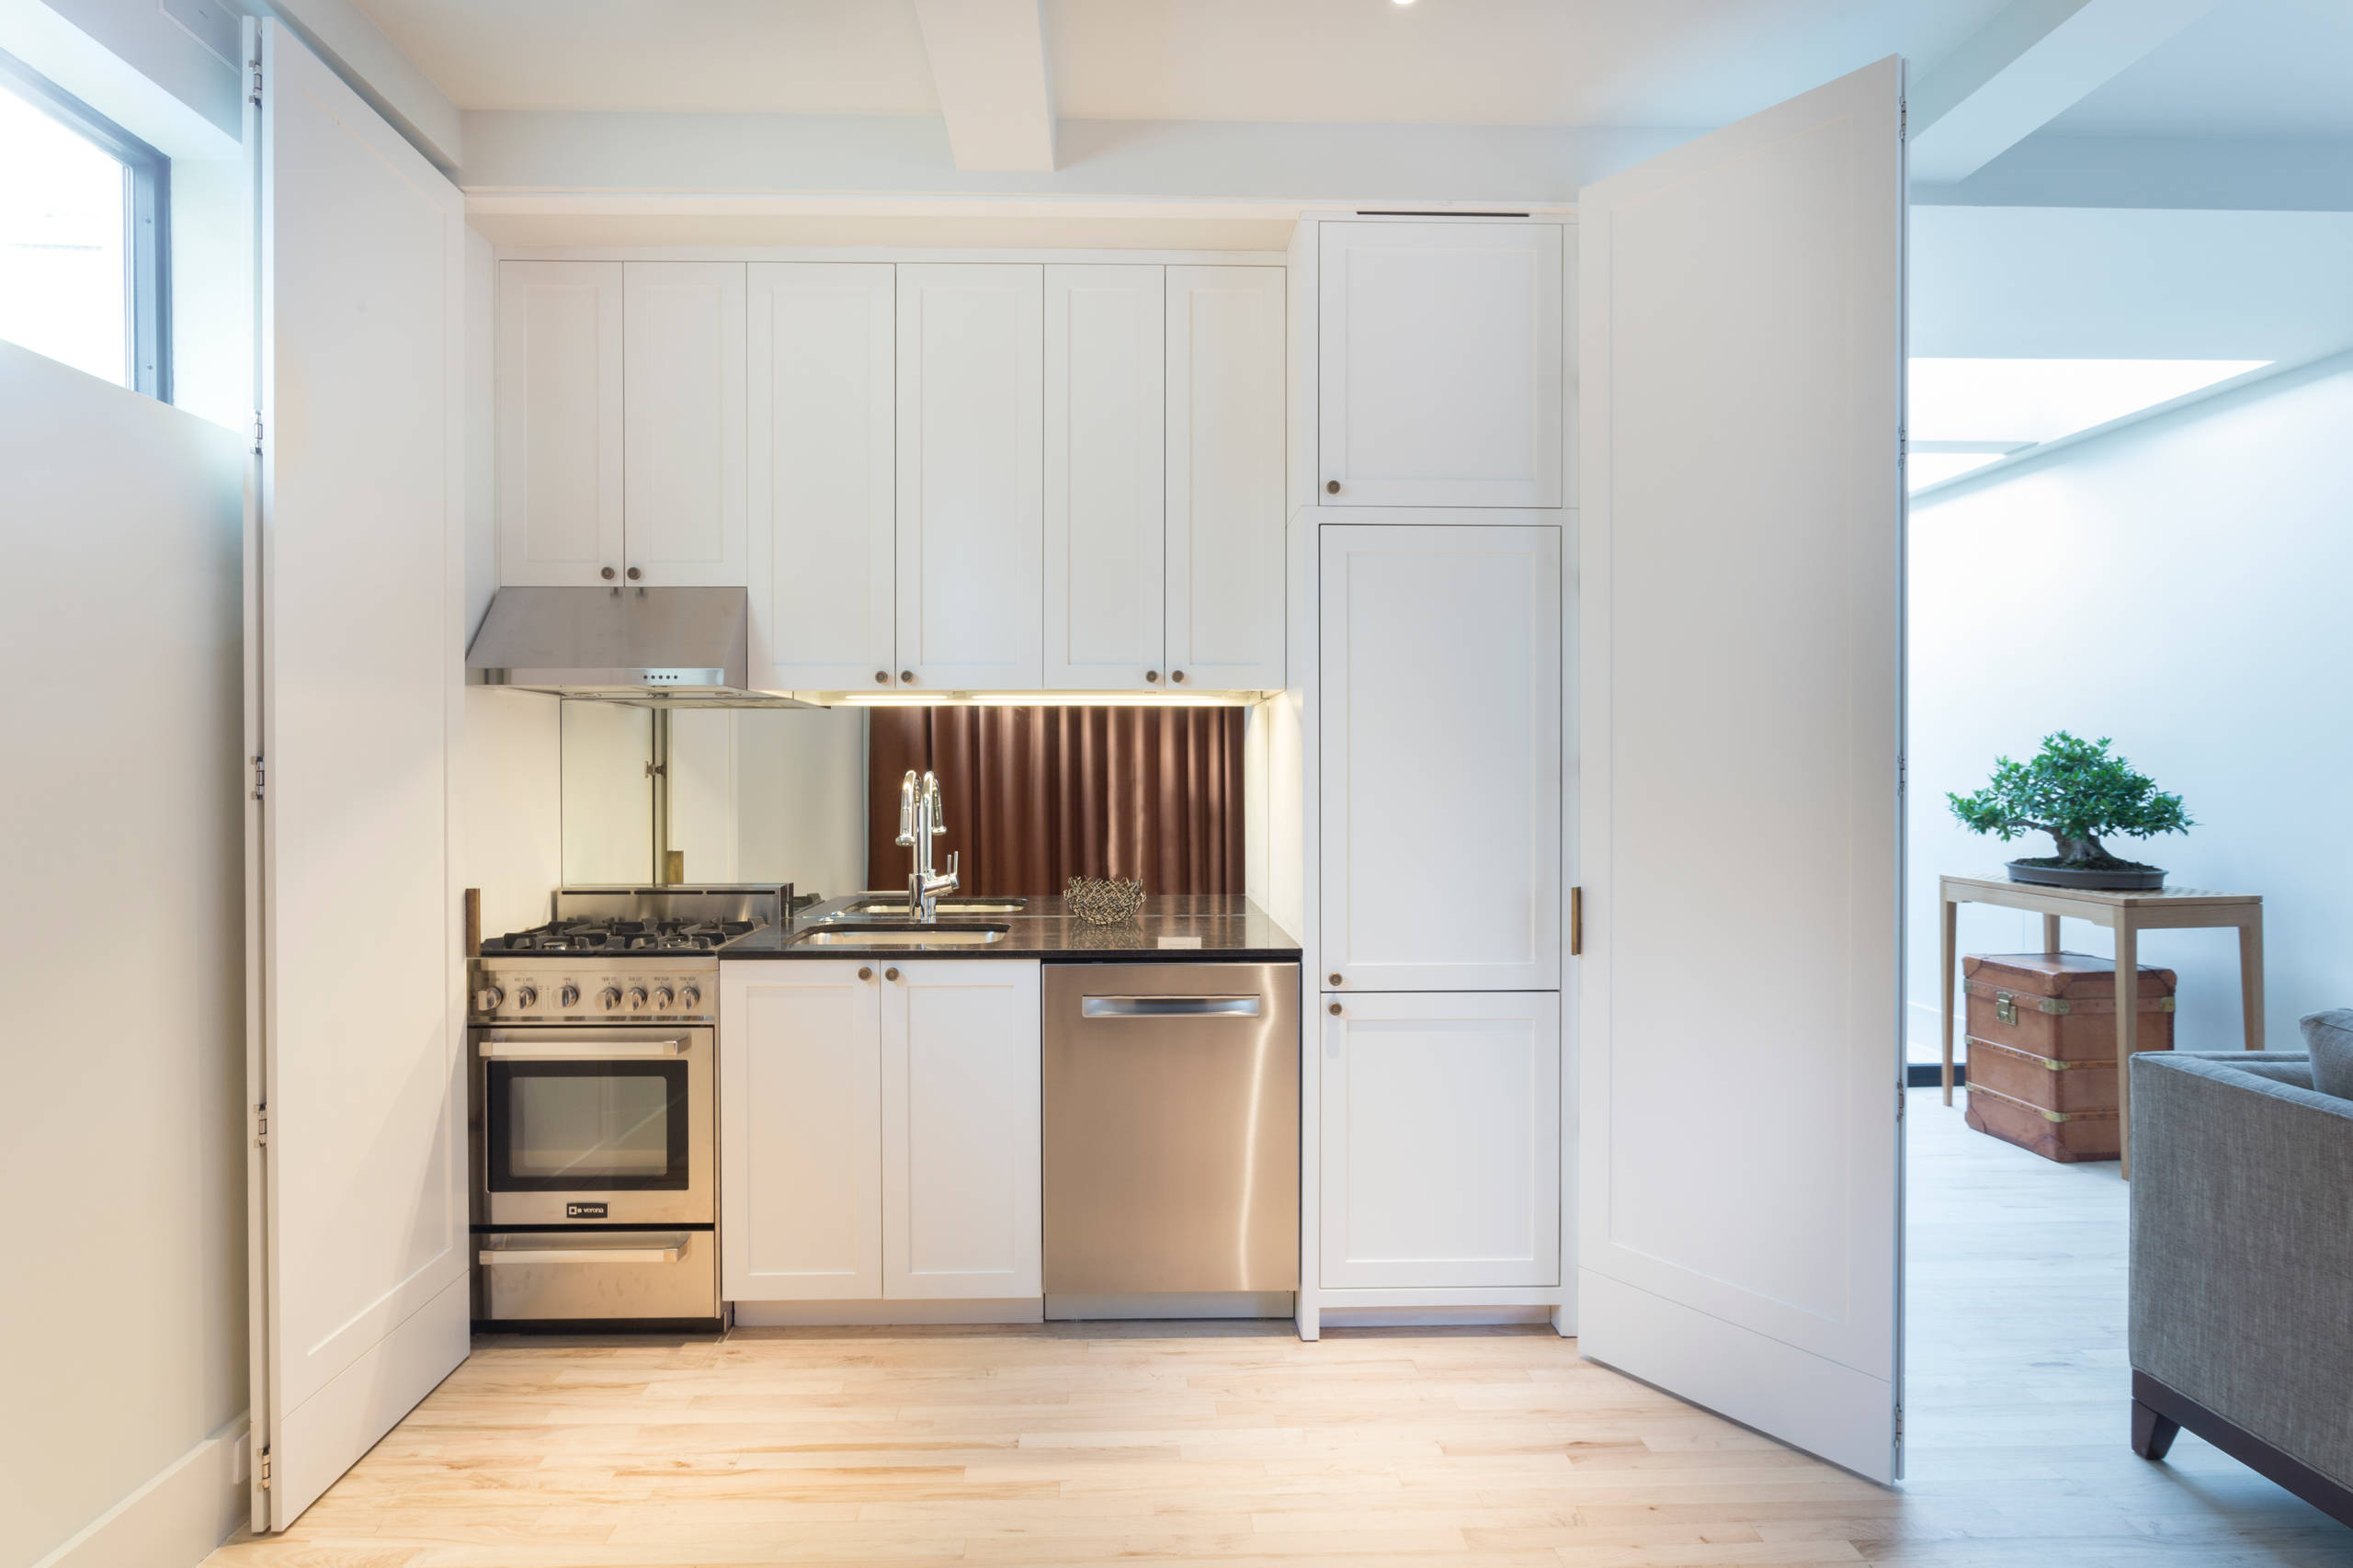 20 Tiny Micro Kitchens for Small Space Living   Houzz UK